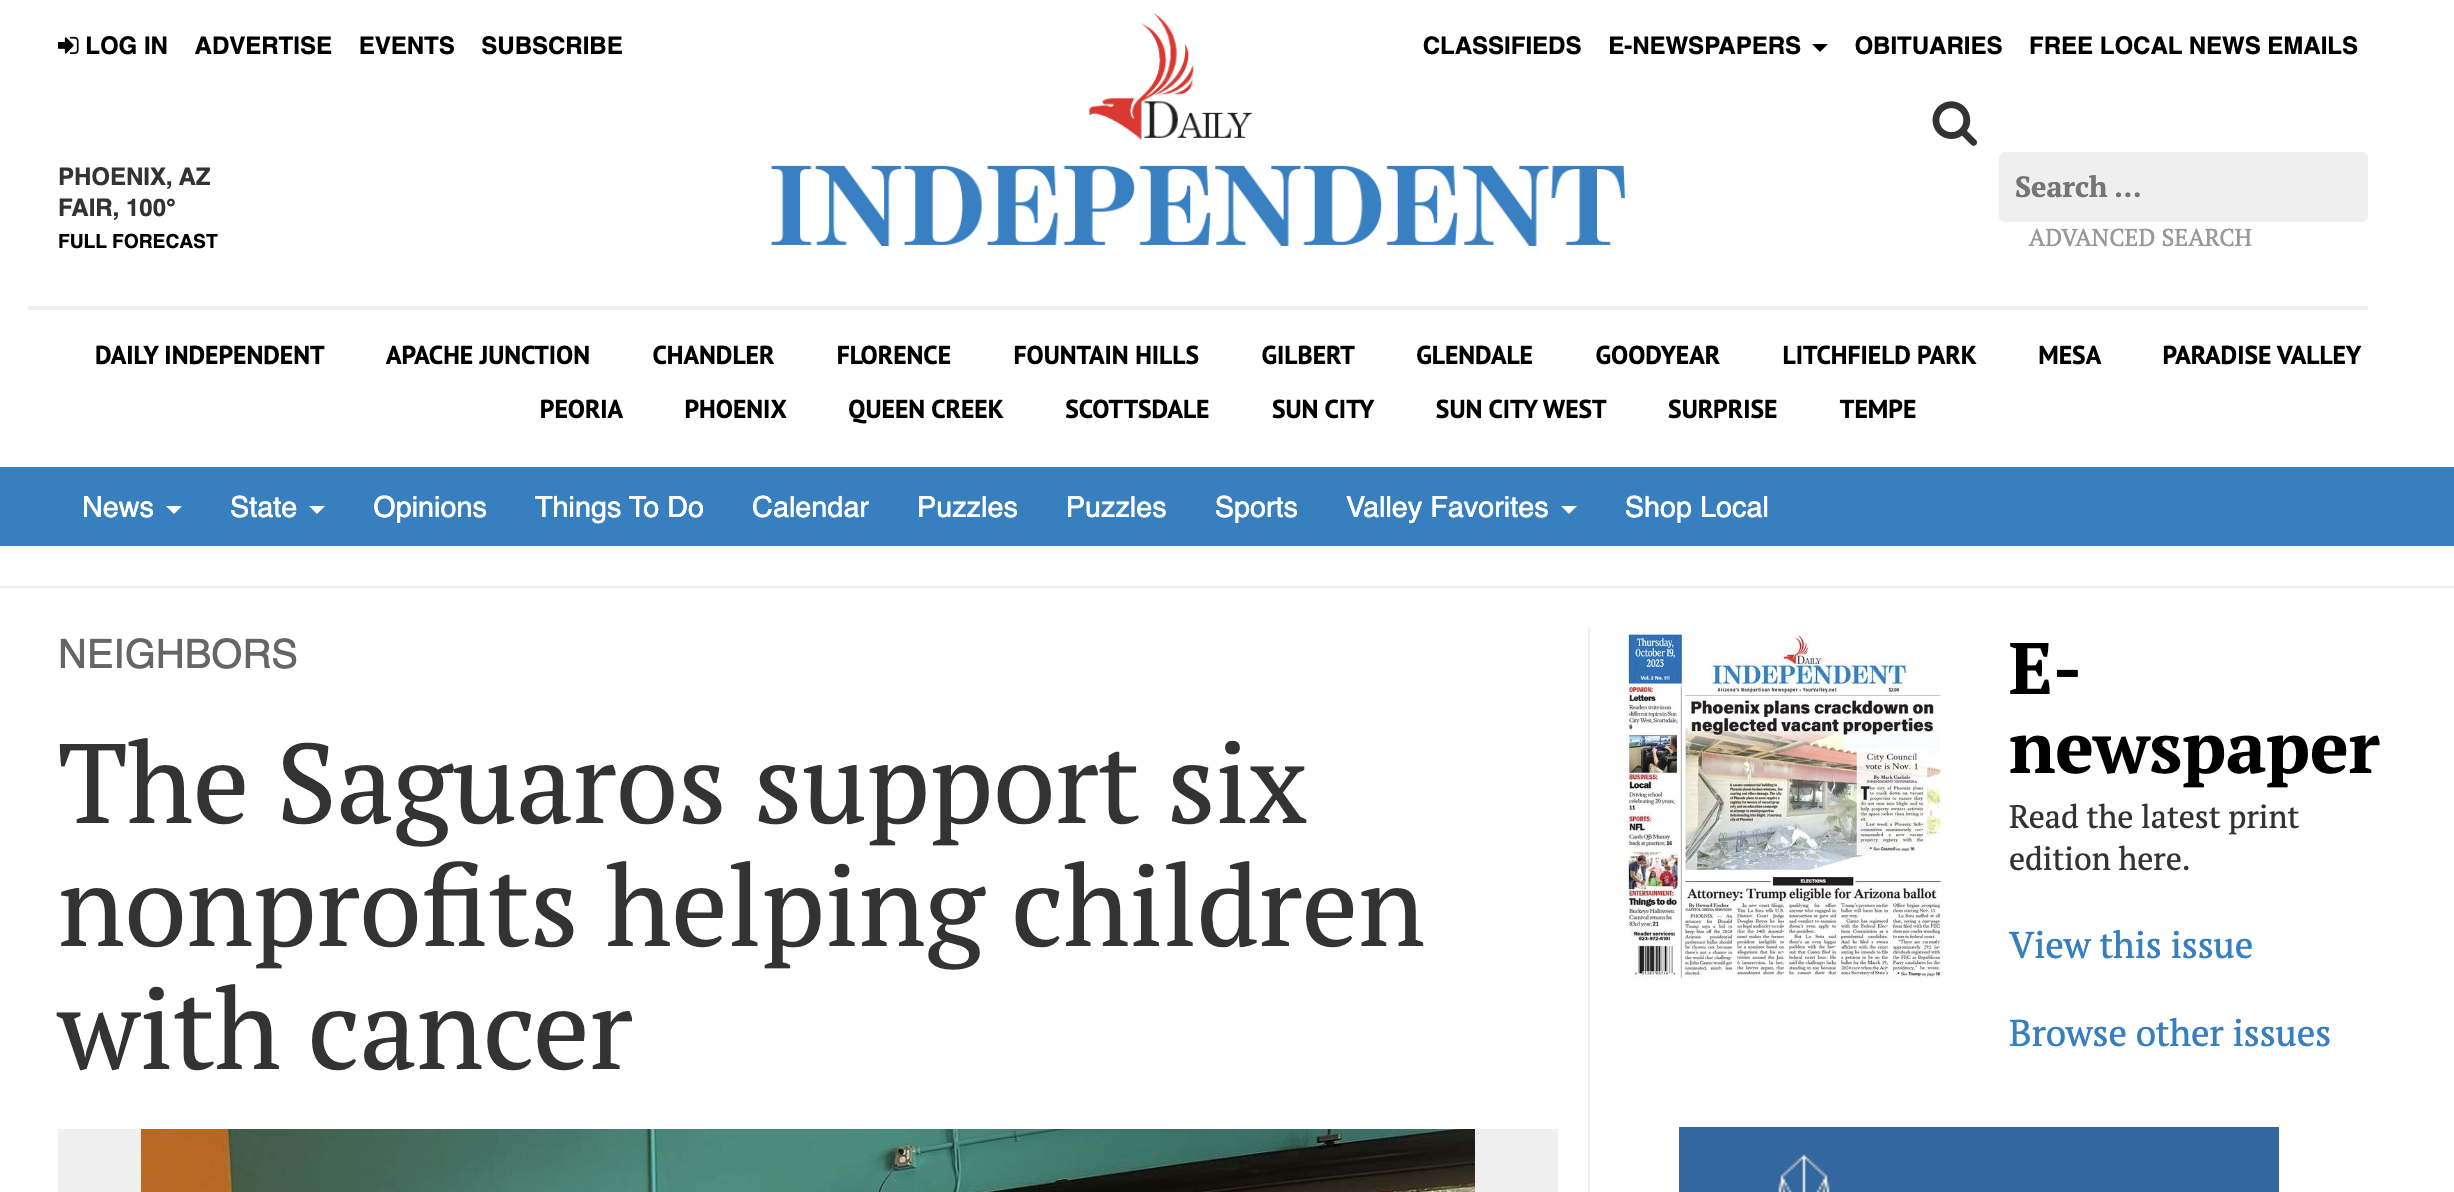 Daily Independent: The Saguaros support six nonprofits helping children with cancer